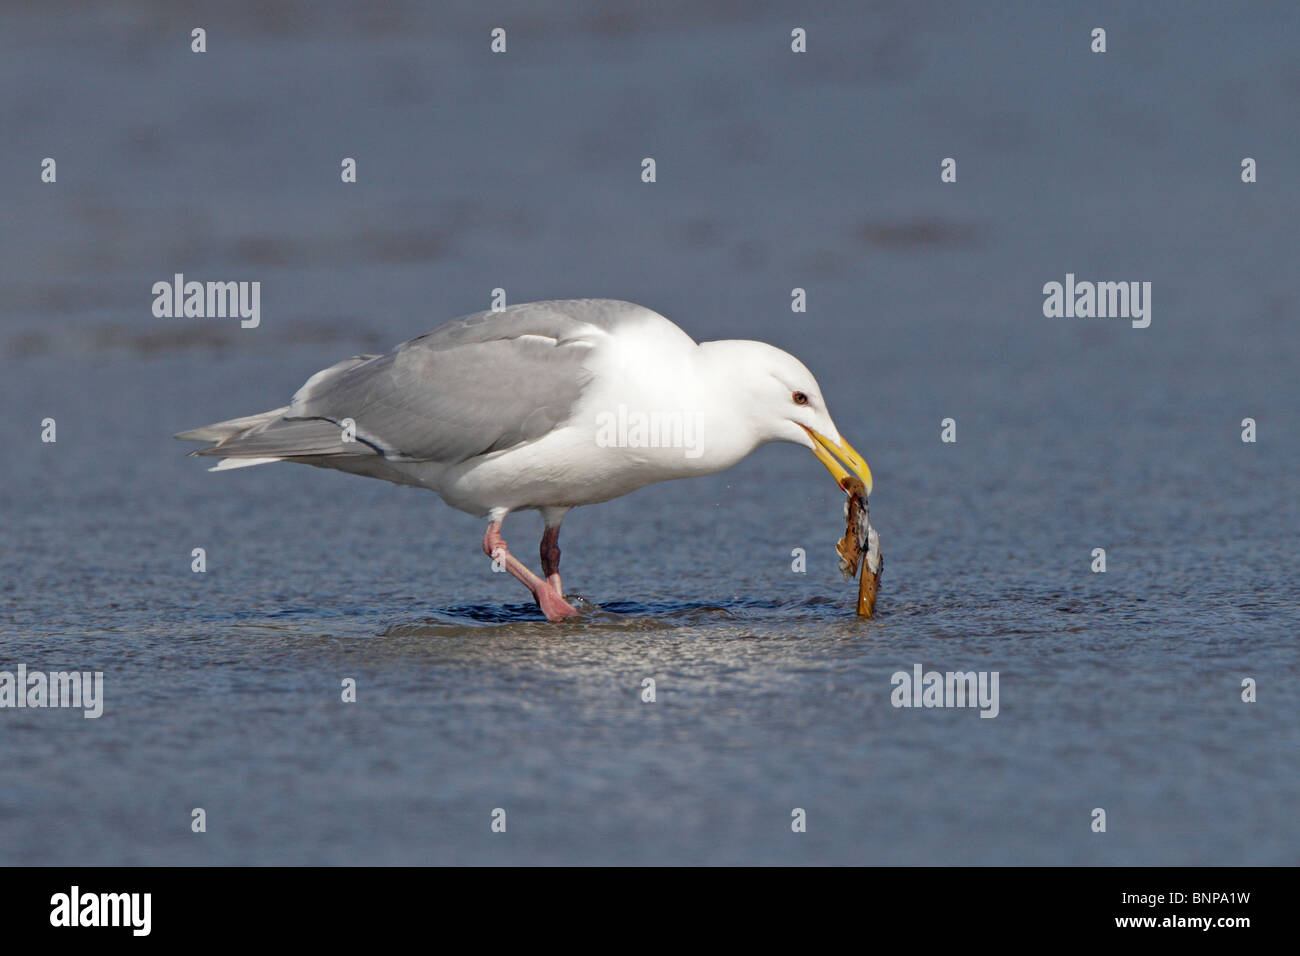 A Glaucous-winged Gull eating a clam on a beach Stock Photo